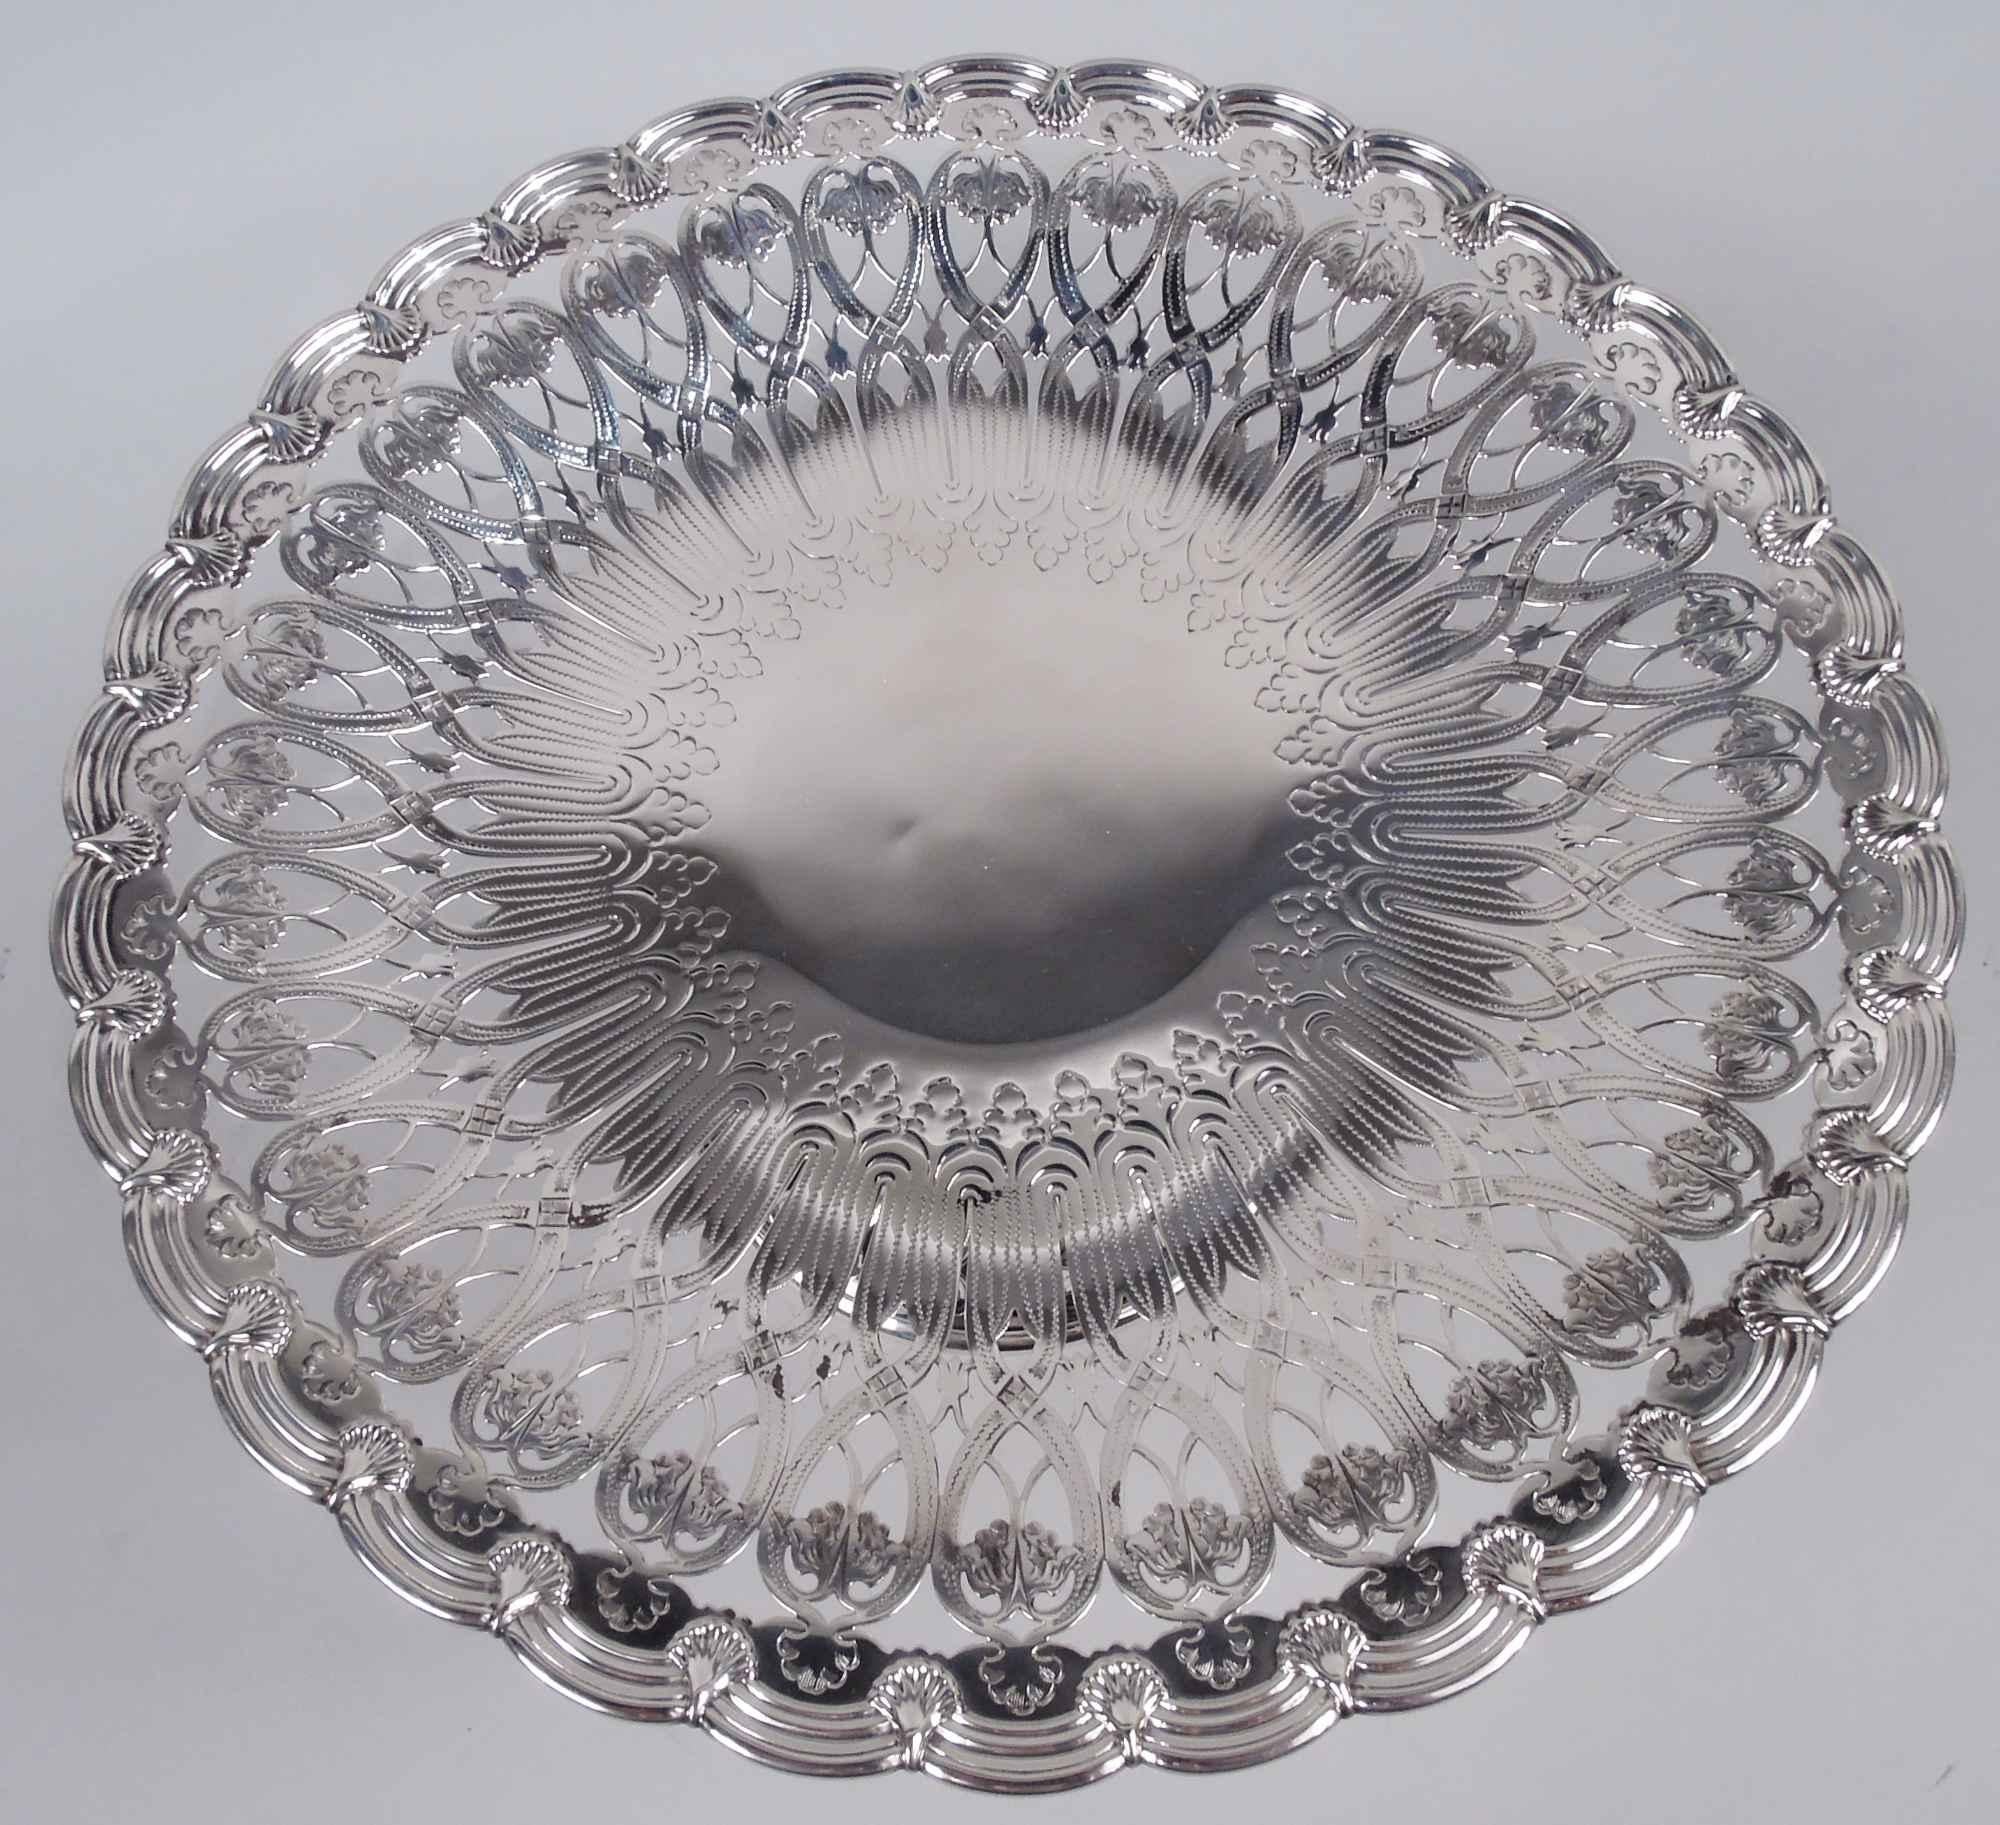 Edwardian Art Nouveau sterling silver compotes. Made by Tiffany & Co. in New York, ca 1915. Round and shallow bowl on upward tapering shaft flowing into raised foot. Well center solid with engraved leaves and tendrils surrounded by pierced